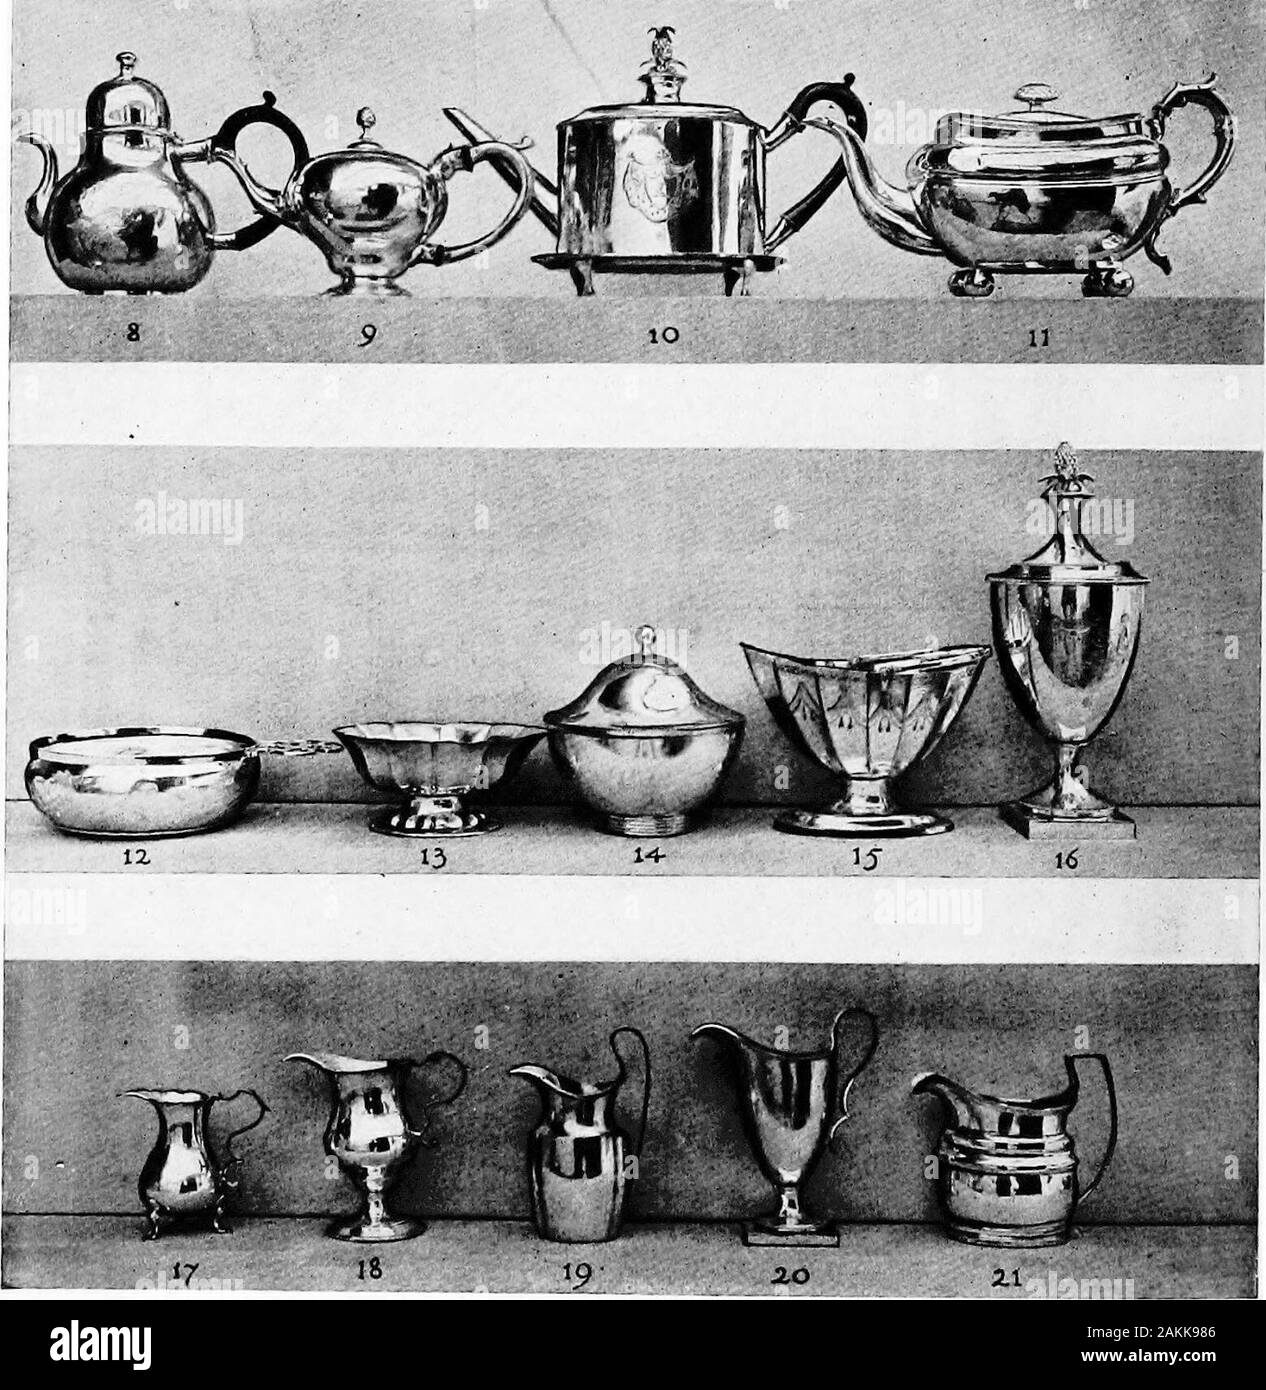 The practical book of early American arts and crafts . CHARACTERISTIC CONTOURS OF FOURTH CHRONOLOGICAL DIVISION c. 1800-C.18301-6, Table-spoons and Tea-spoons, Coffin-headed and Fiddle-headed; 7 and 8,Cream Pitcher and Hot Water Jug; 9, Cup or Can; 10, Moulded Teapot; H, GadroonedOblong Sugar Bowl; 12, Moulded Cream Pitcher; 13, Moulded Oblong Sugar Bowl;14 and 15, Mugs or Cups. CHRONOLOGICAL SEQUENCE OF CHARACTERISTIC CONTOURS1-4, Mugs; 5, Beaker; 6 and 7, Cans; 8-11, Teapots; 12-16, PorriDEer. Bowls and Sugar Bowls- 17-21, Cream Pitchers SILVER; DOMESTIC AND ECCLESIASTICAL 103 at an early da Stock Photo